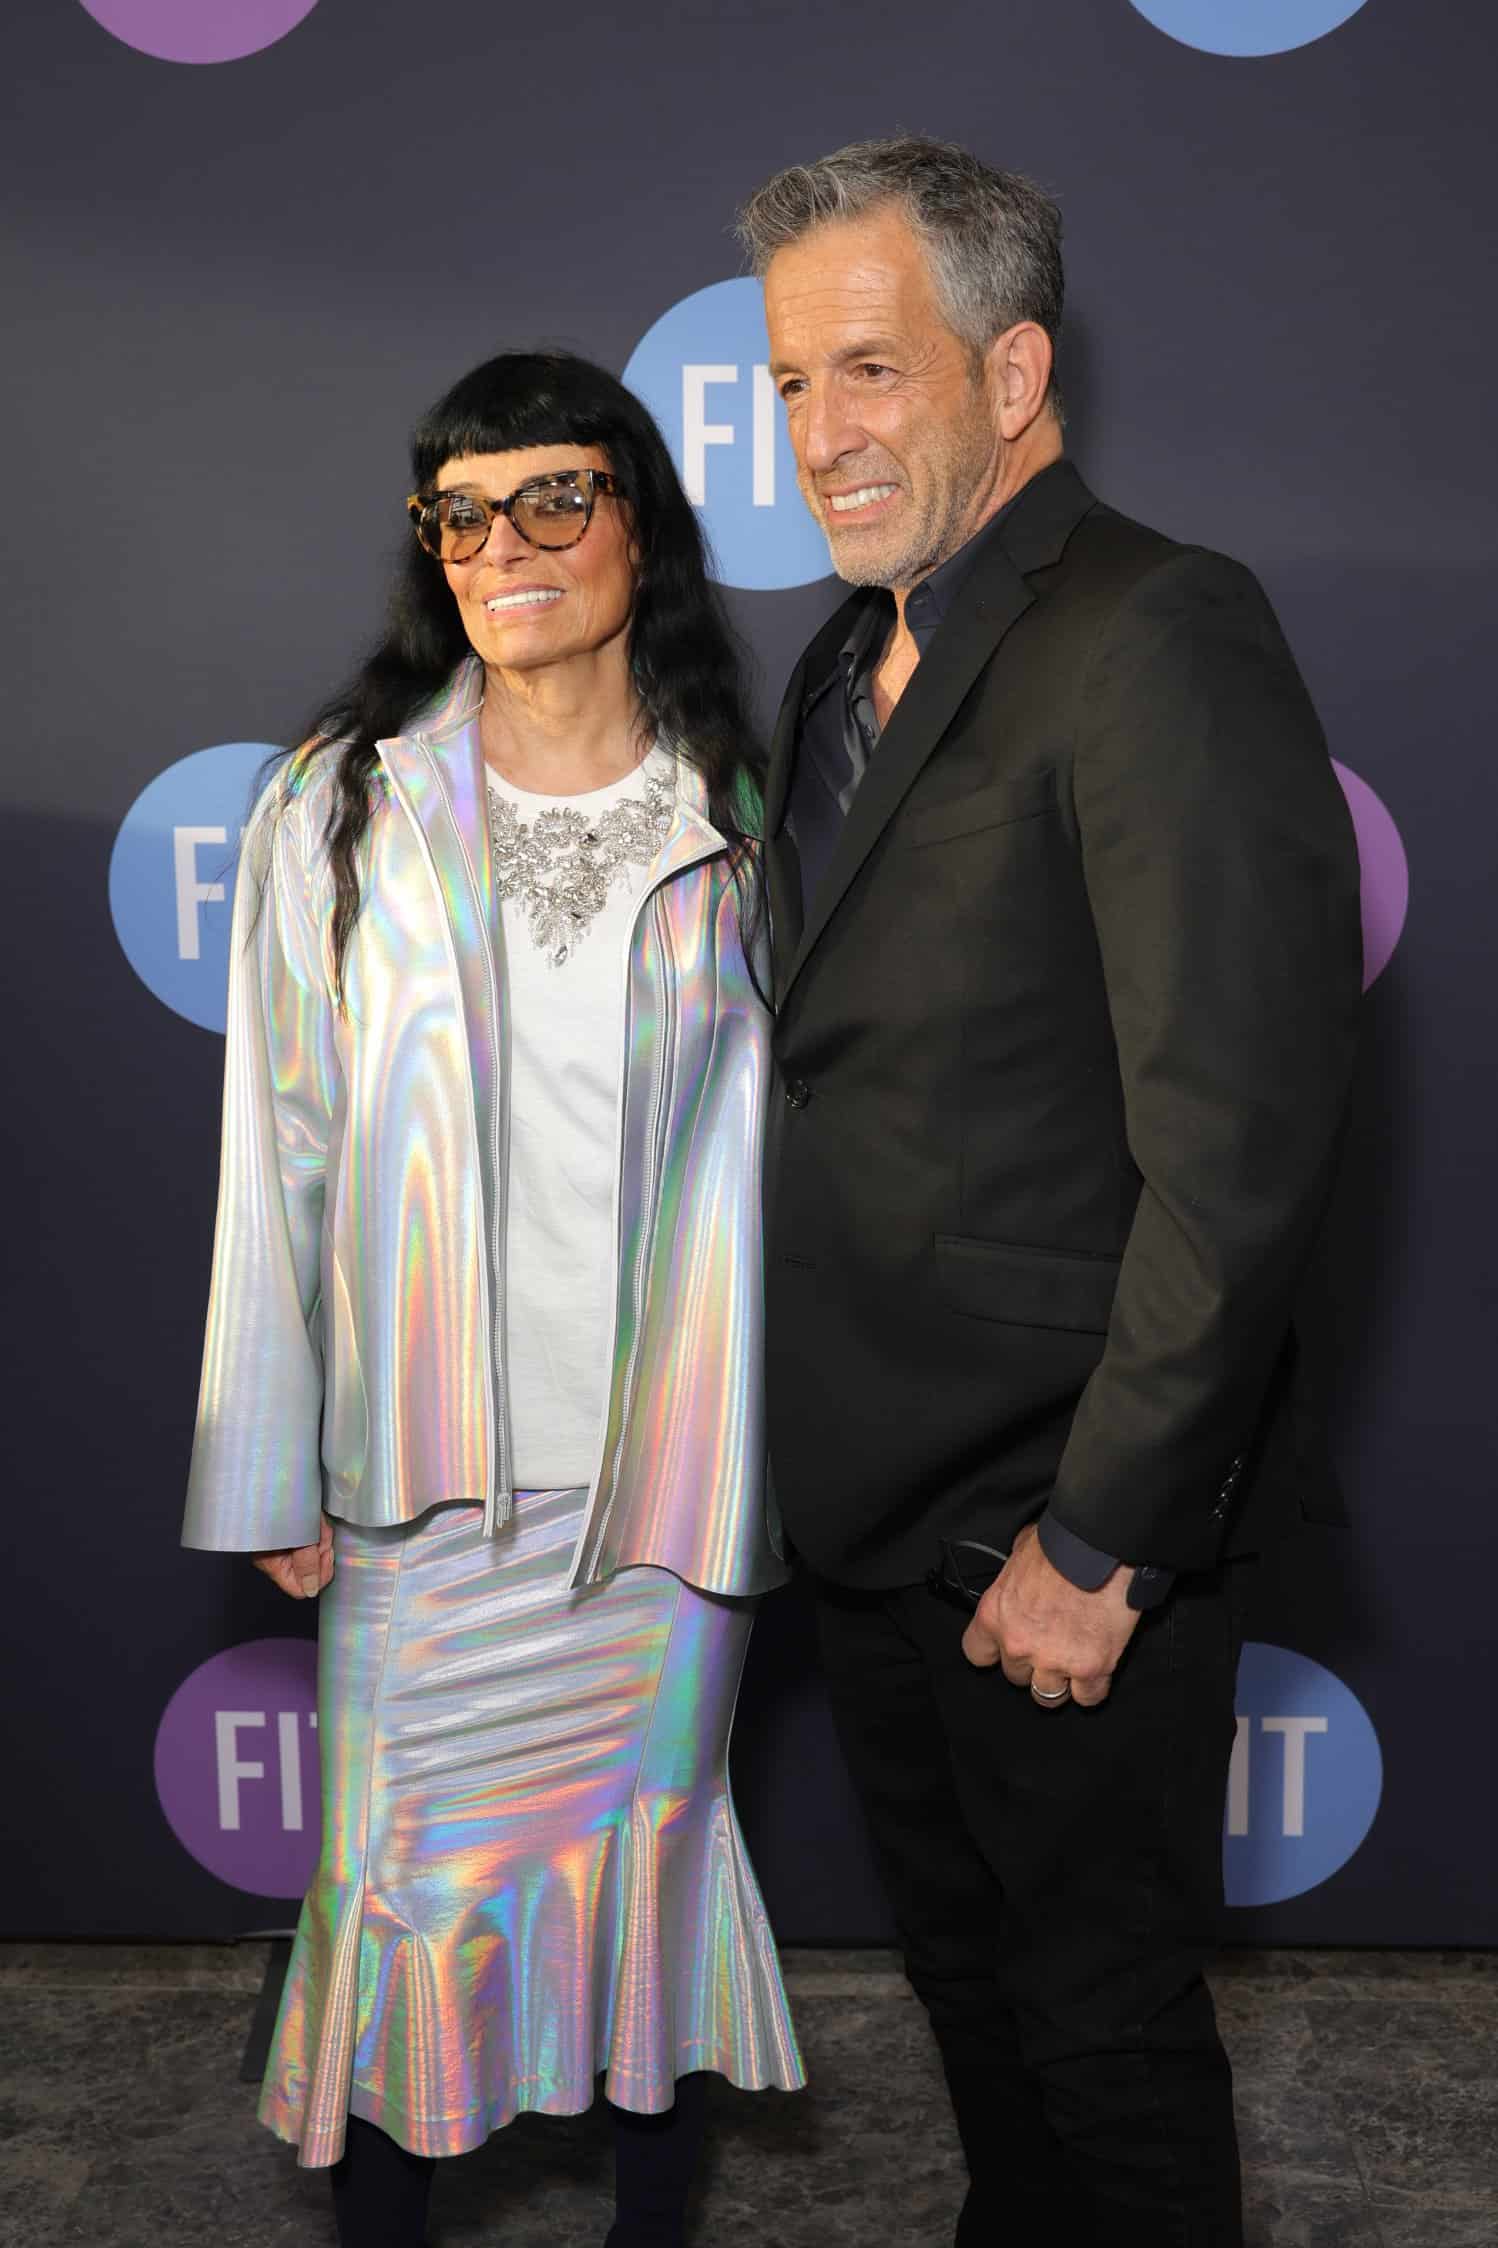 Norma Kamali, Kenneth Cole, FIT, Fashion Institute of Technology, awards, gala, red carpet, fashion schools